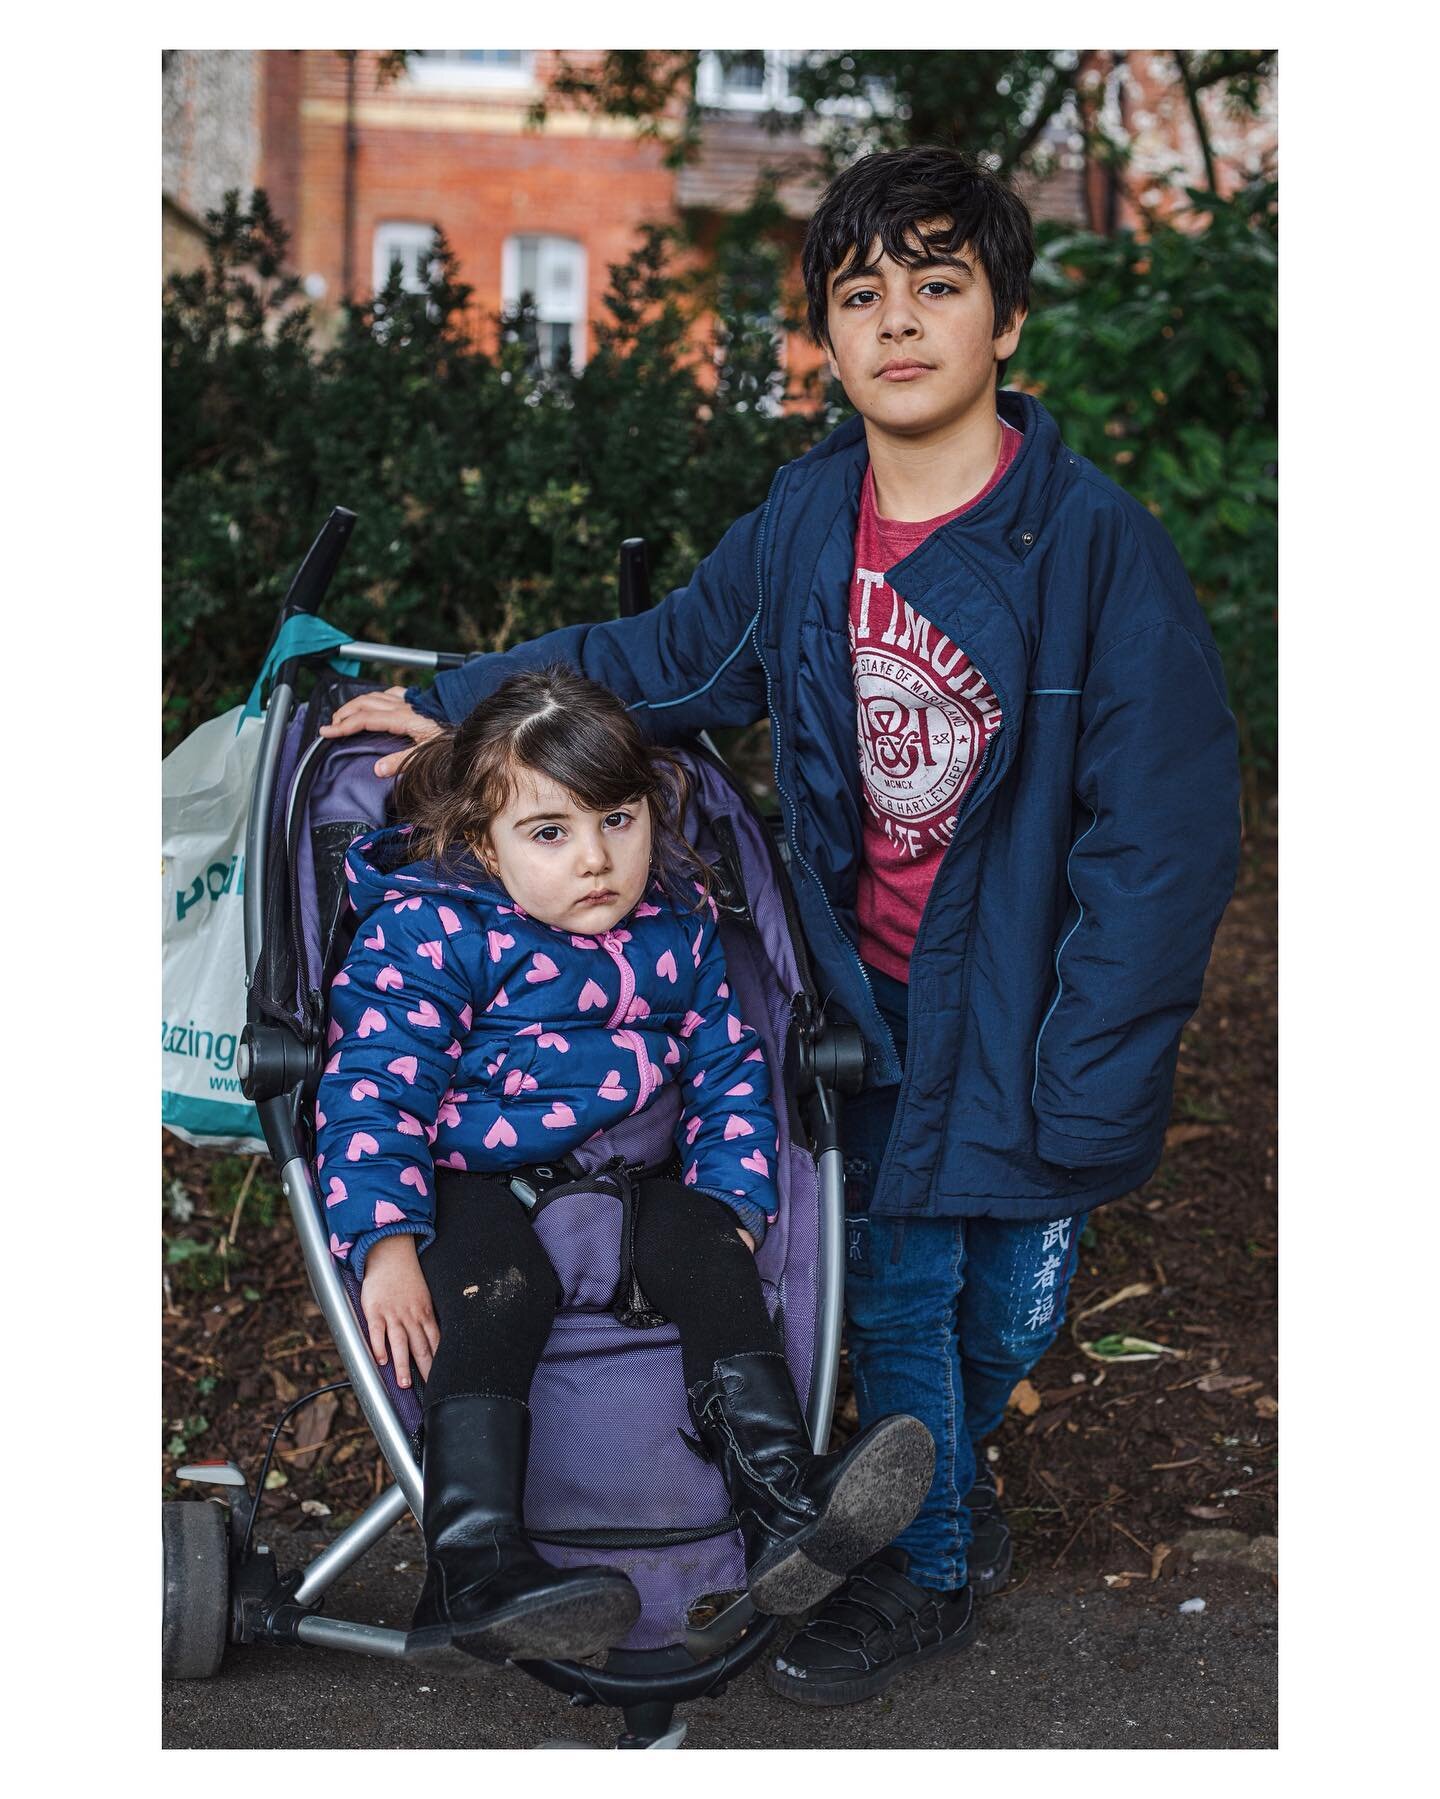 ParkLife 2020 
I met this family during my daily park strolls during lockdown. Their mother was reluctant to be part of the picture. I love the little girls facial expression, she&rsquo;s like a doll.
.
.
.
.
.
.
#parklife #winchesterstreetphotograph